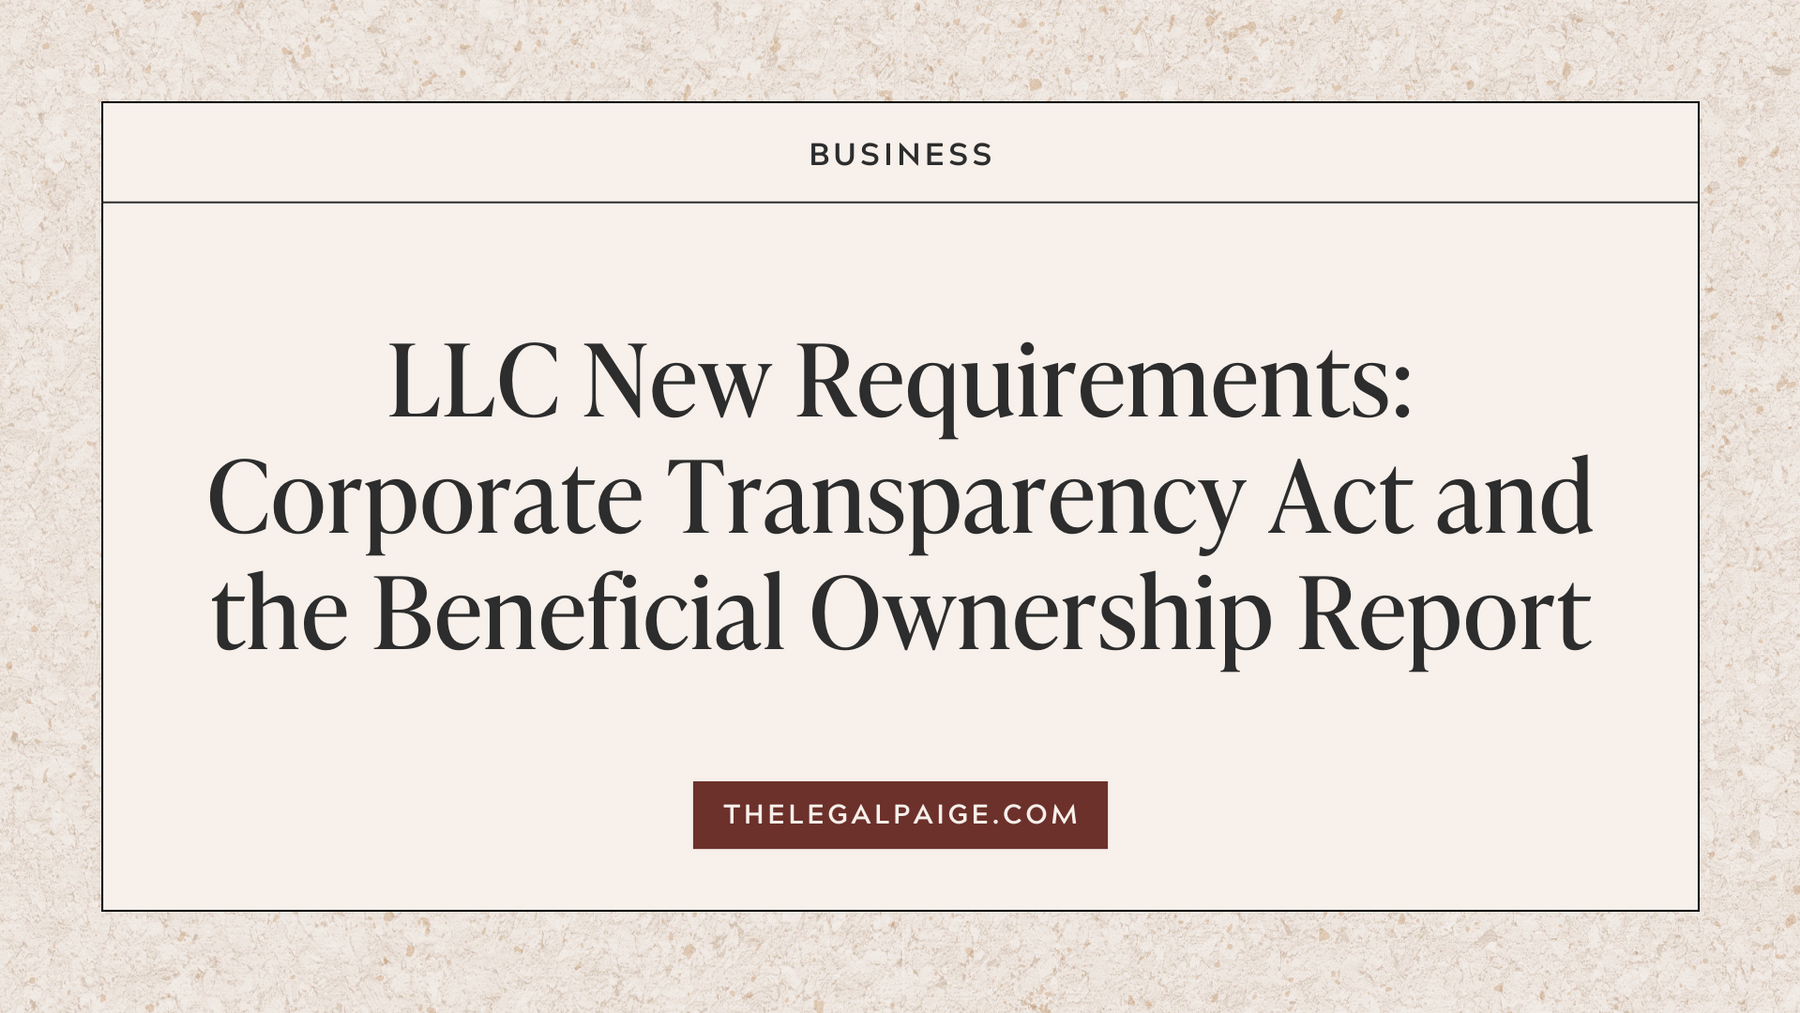 The Legal Page LLC New Requirements: Corporate Transparency Act and the Beneficial Ownership Report